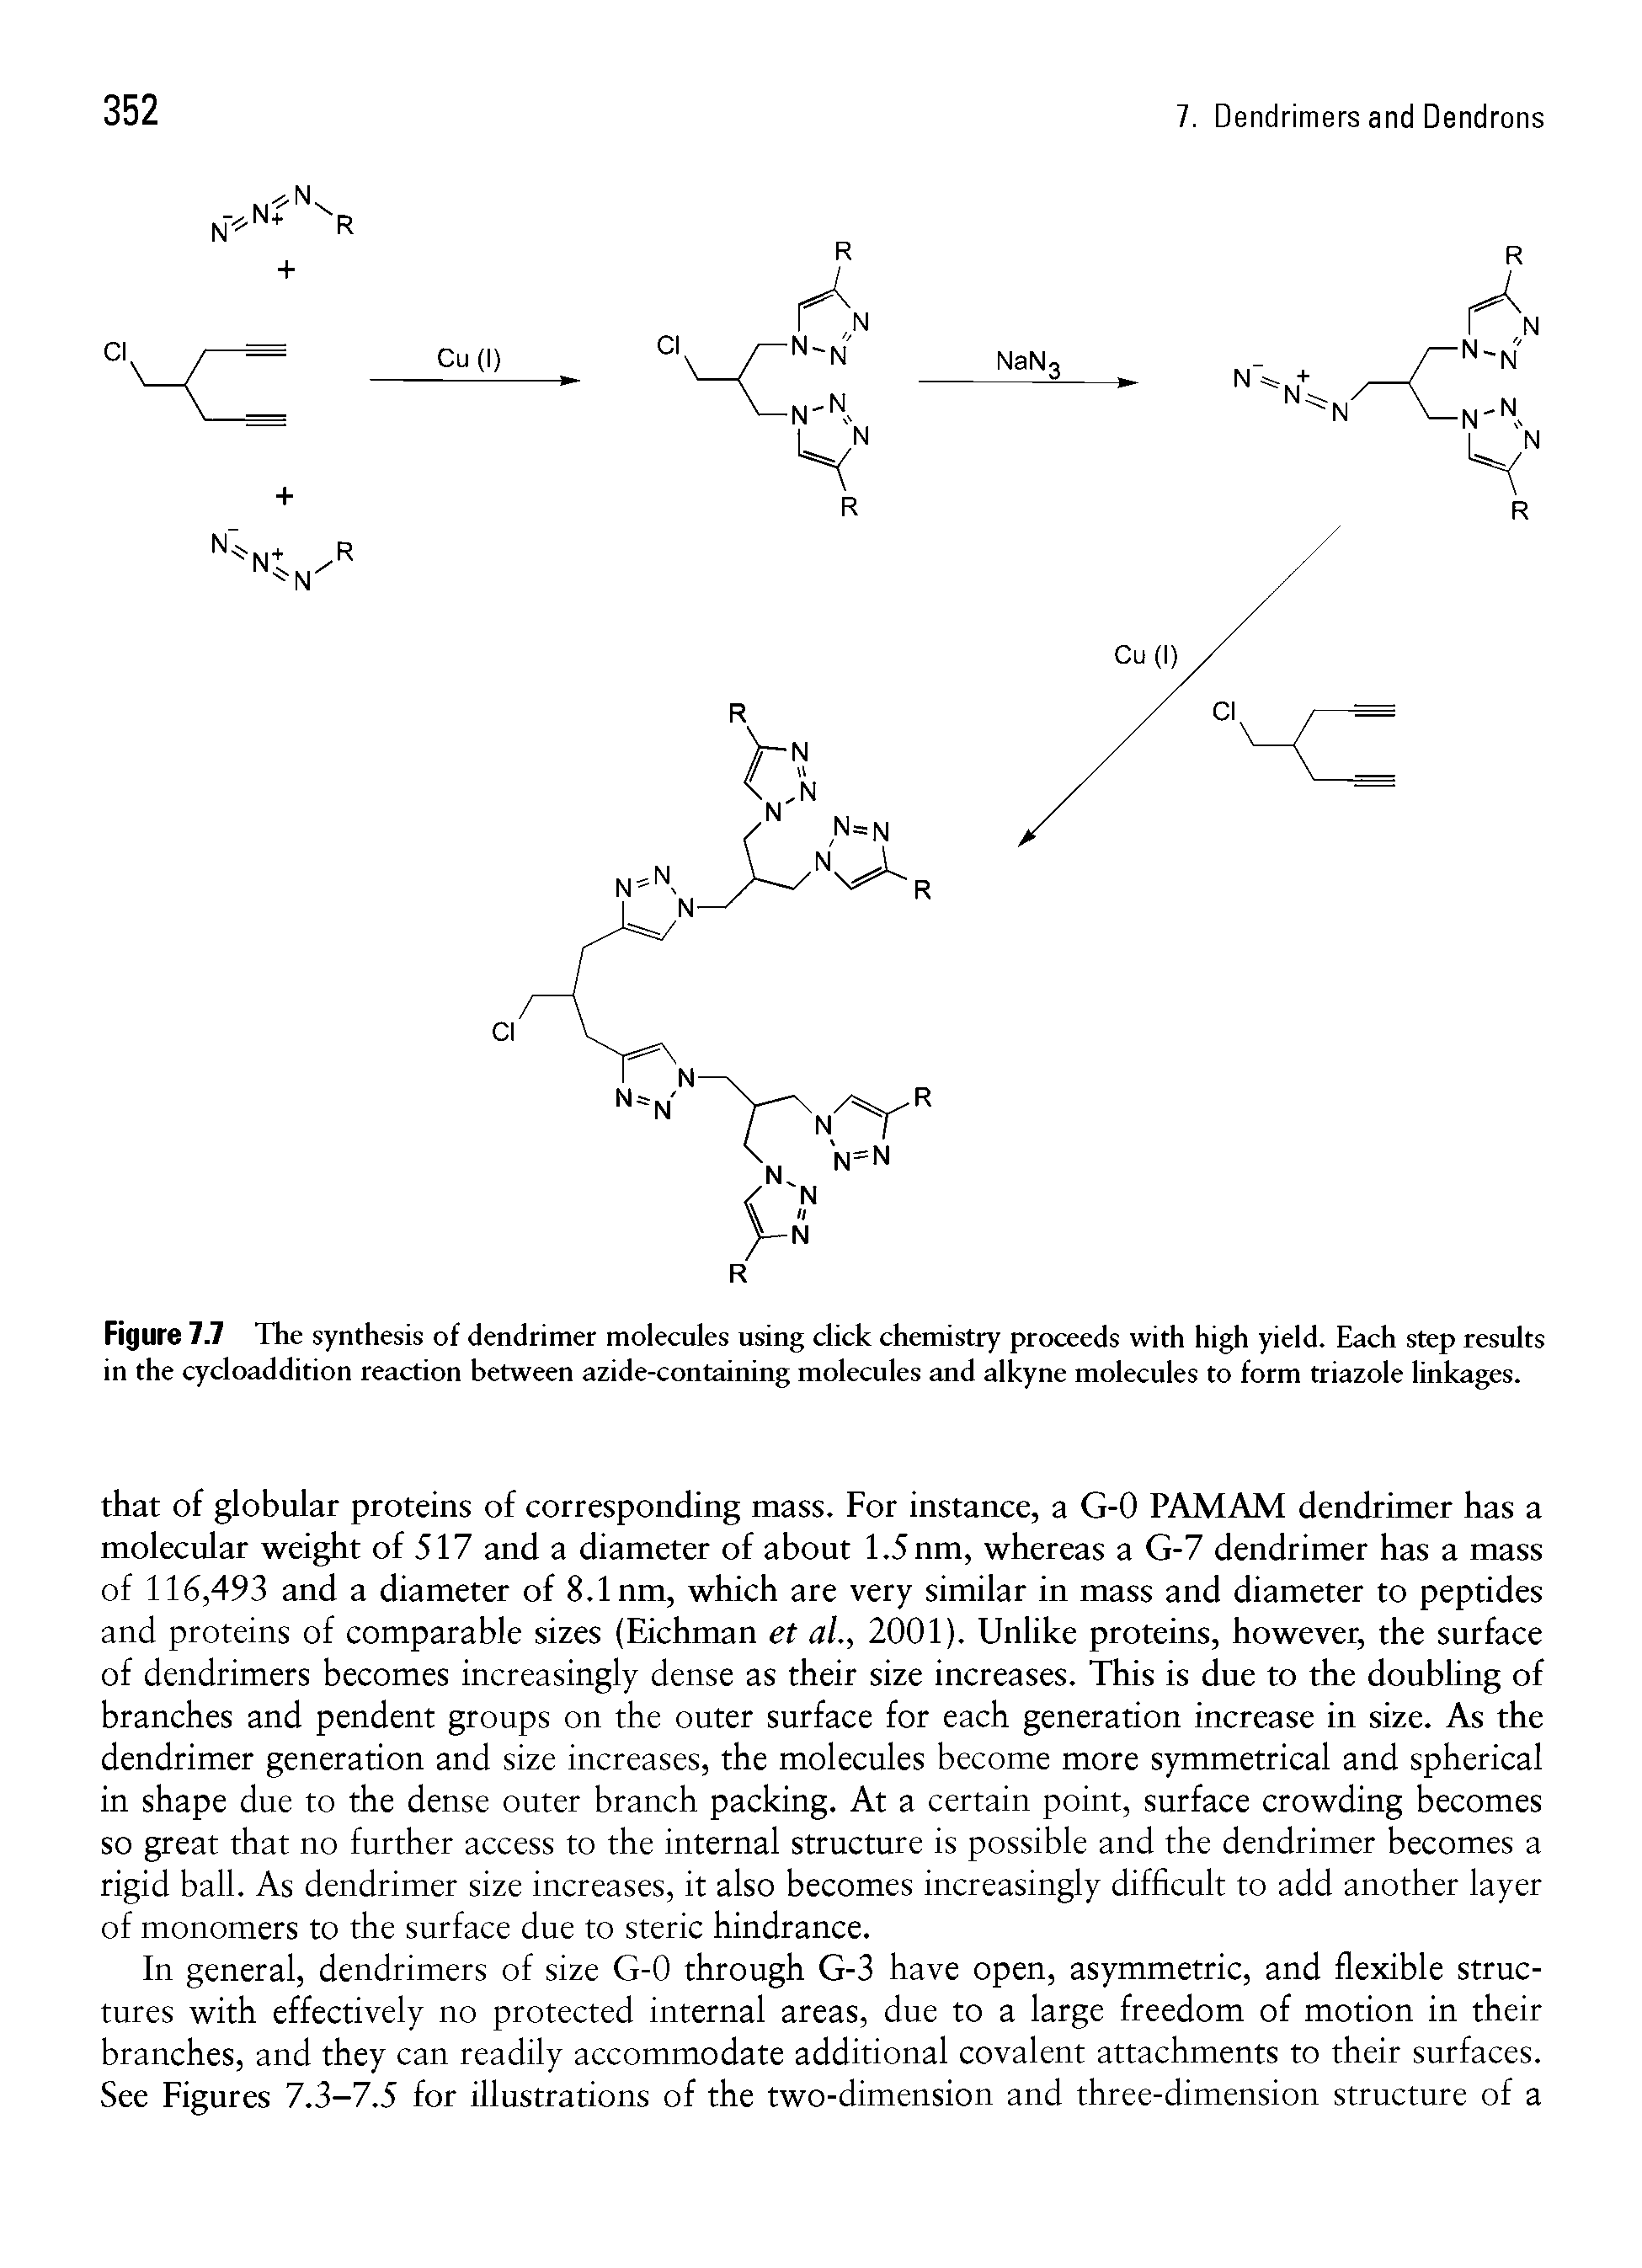 Figure 7.7 The synthesis of dendrimer molecules using click chemistry proceeds with high yield. Each step results in the cycloaddition reaction between azide-containing molecules and alkyne molecules to form triazole linkages.